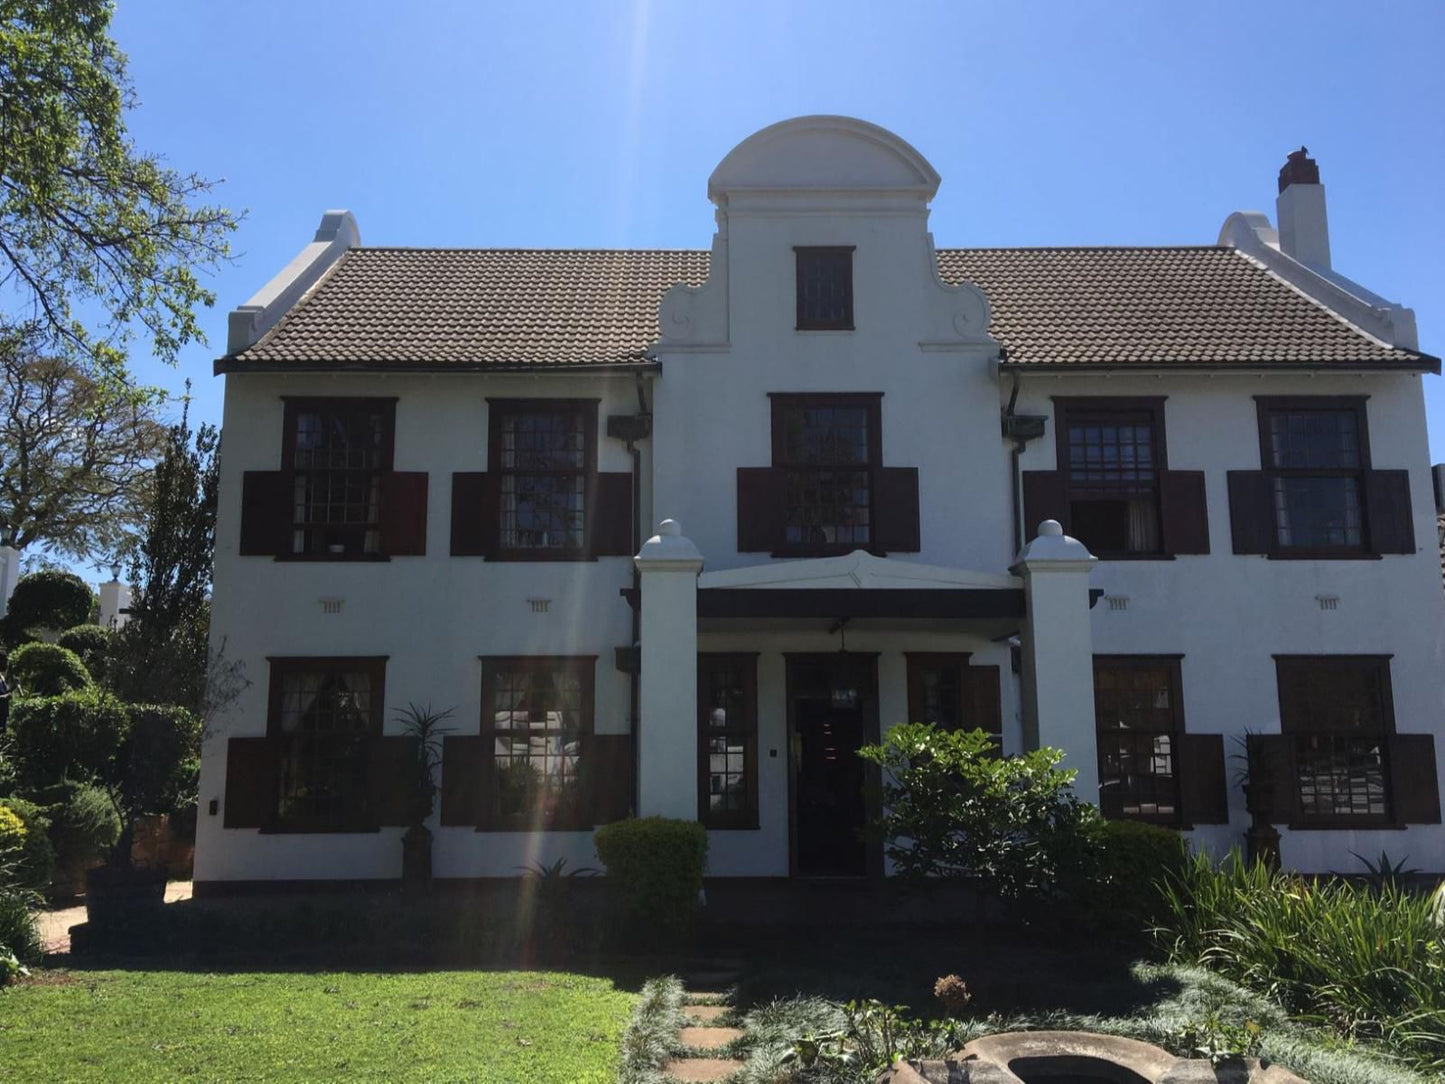 Holland House Windermere Durban Kwazulu Natal South Africa Building, Architecture, House